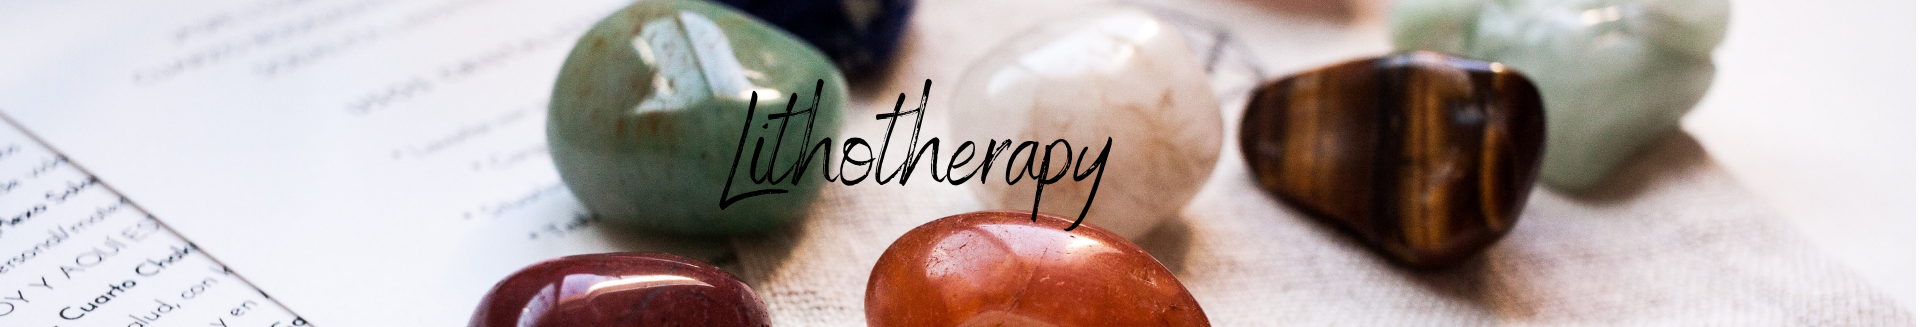 Lithotherapy: Discover the power of stones!